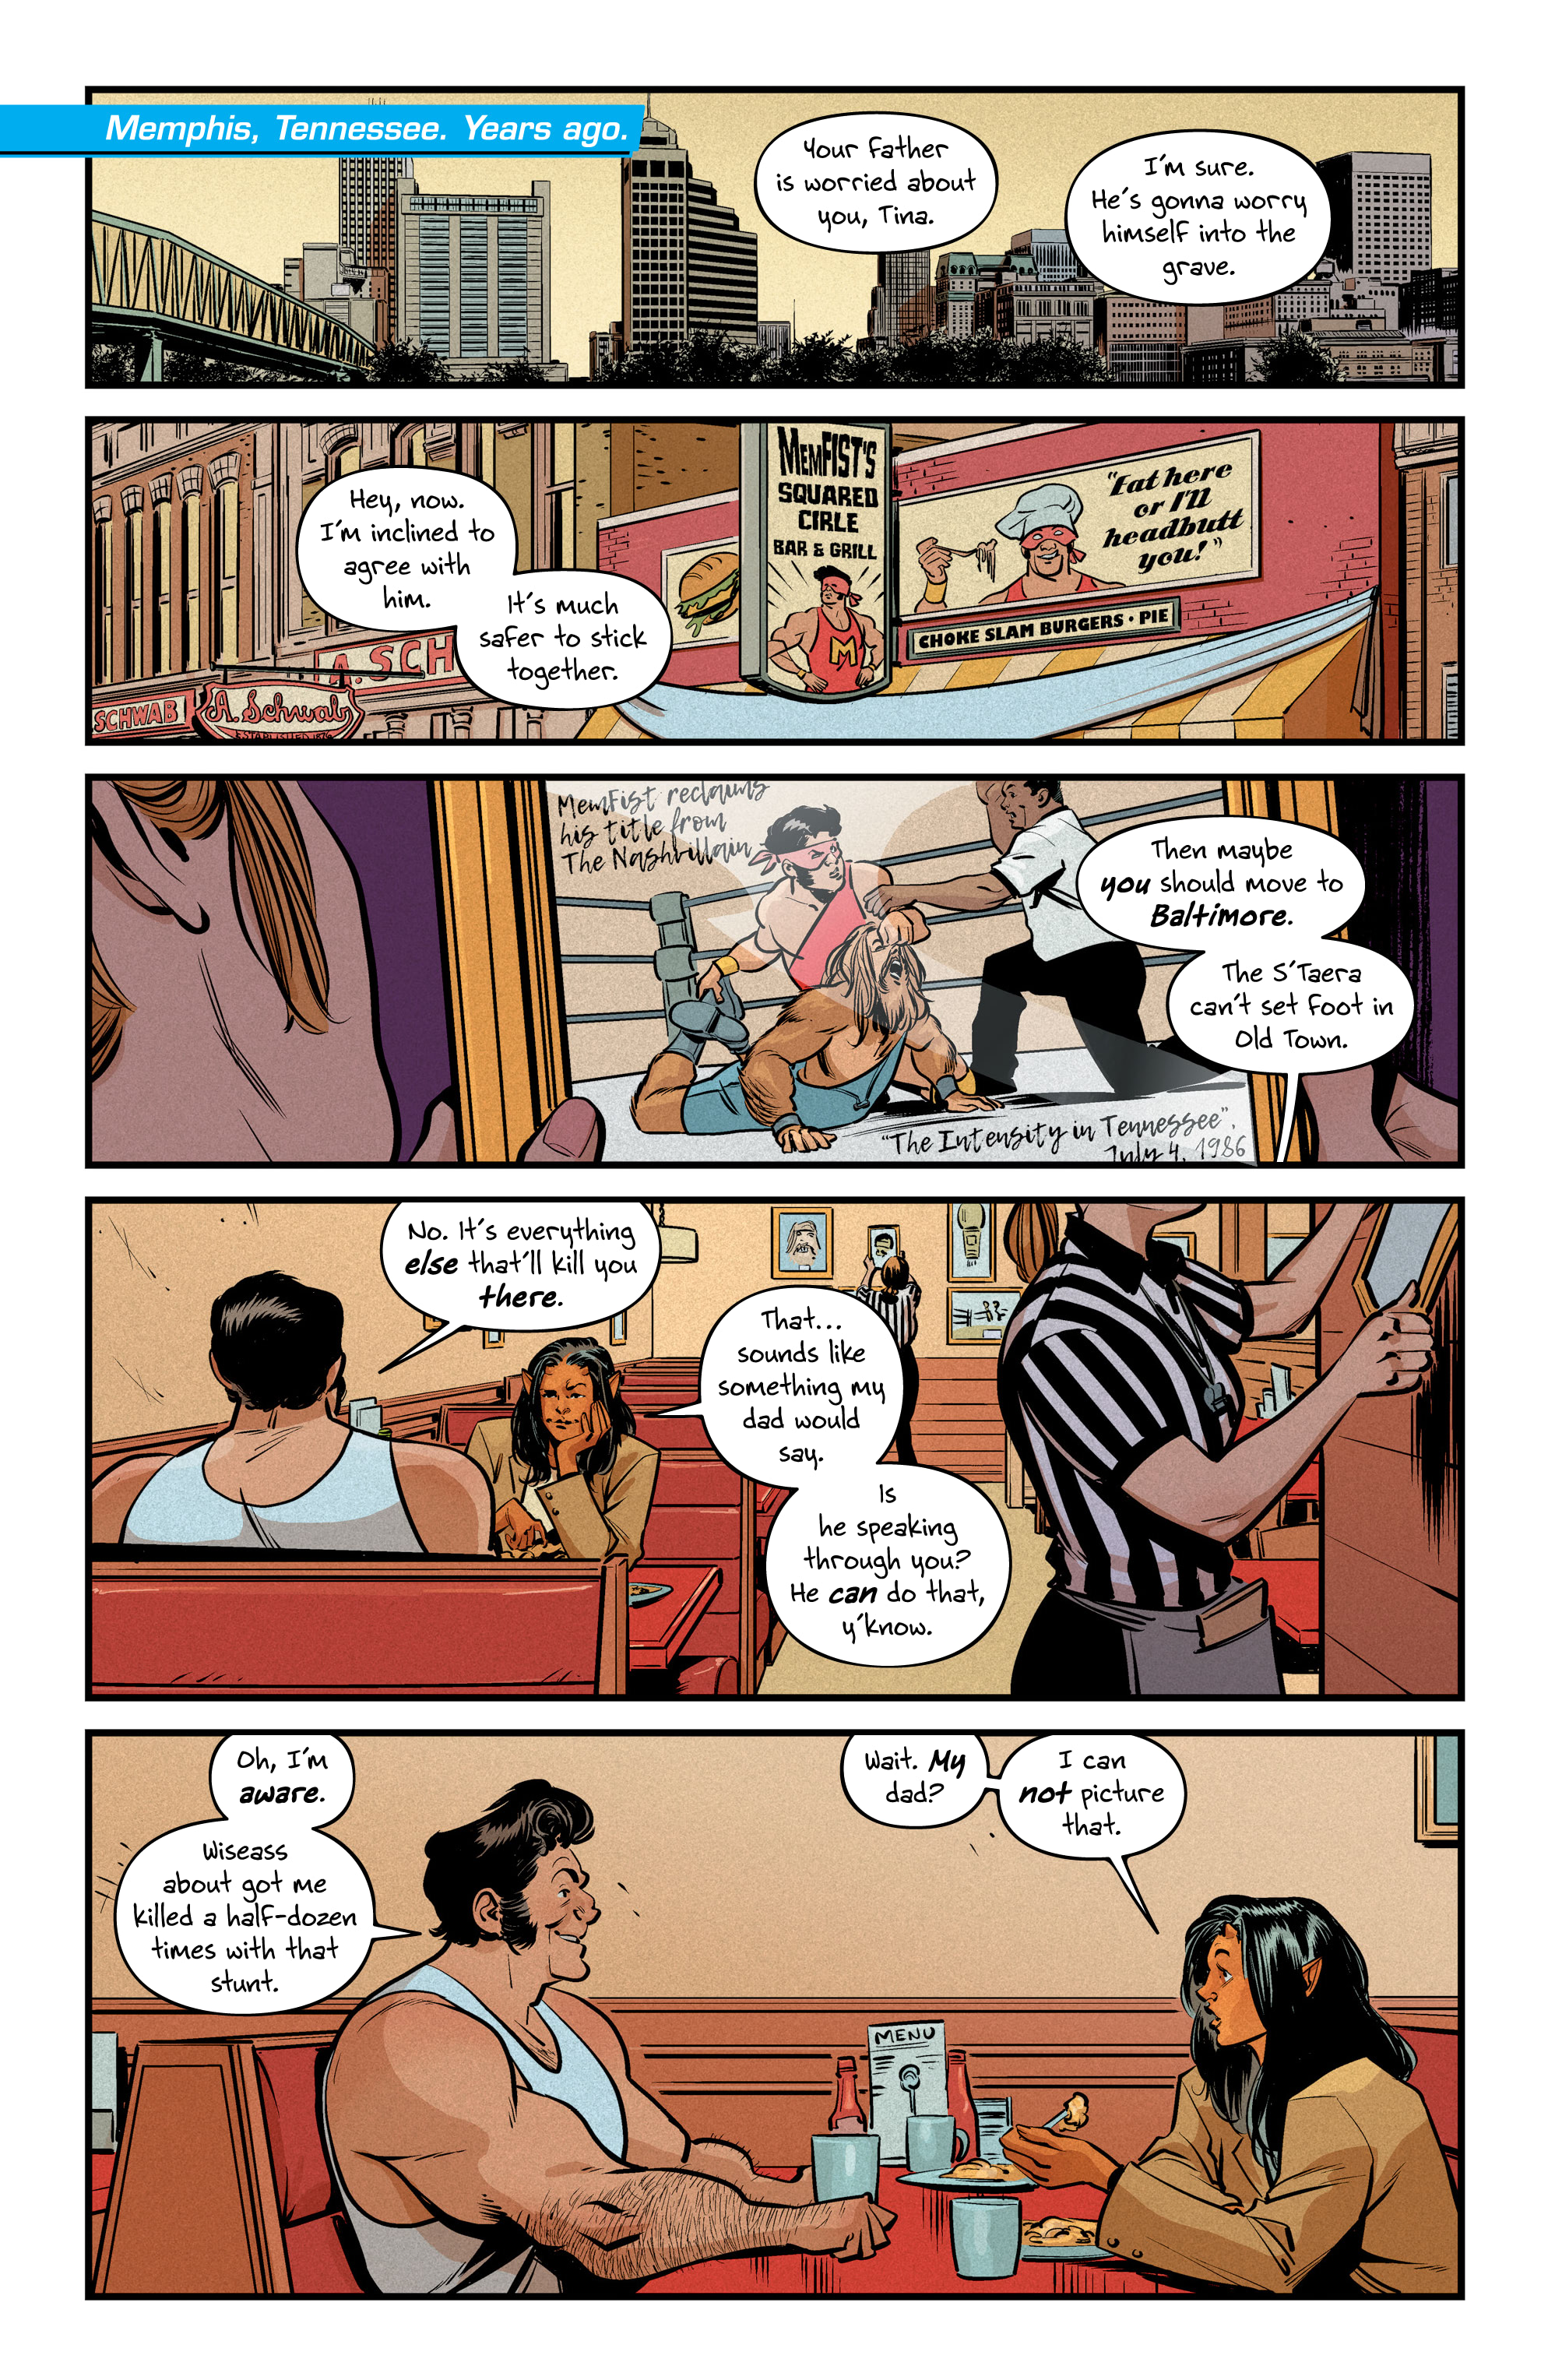 Grumble: Memphis & Beyond the Infinite (2020-): Chapter 1 - Page 3